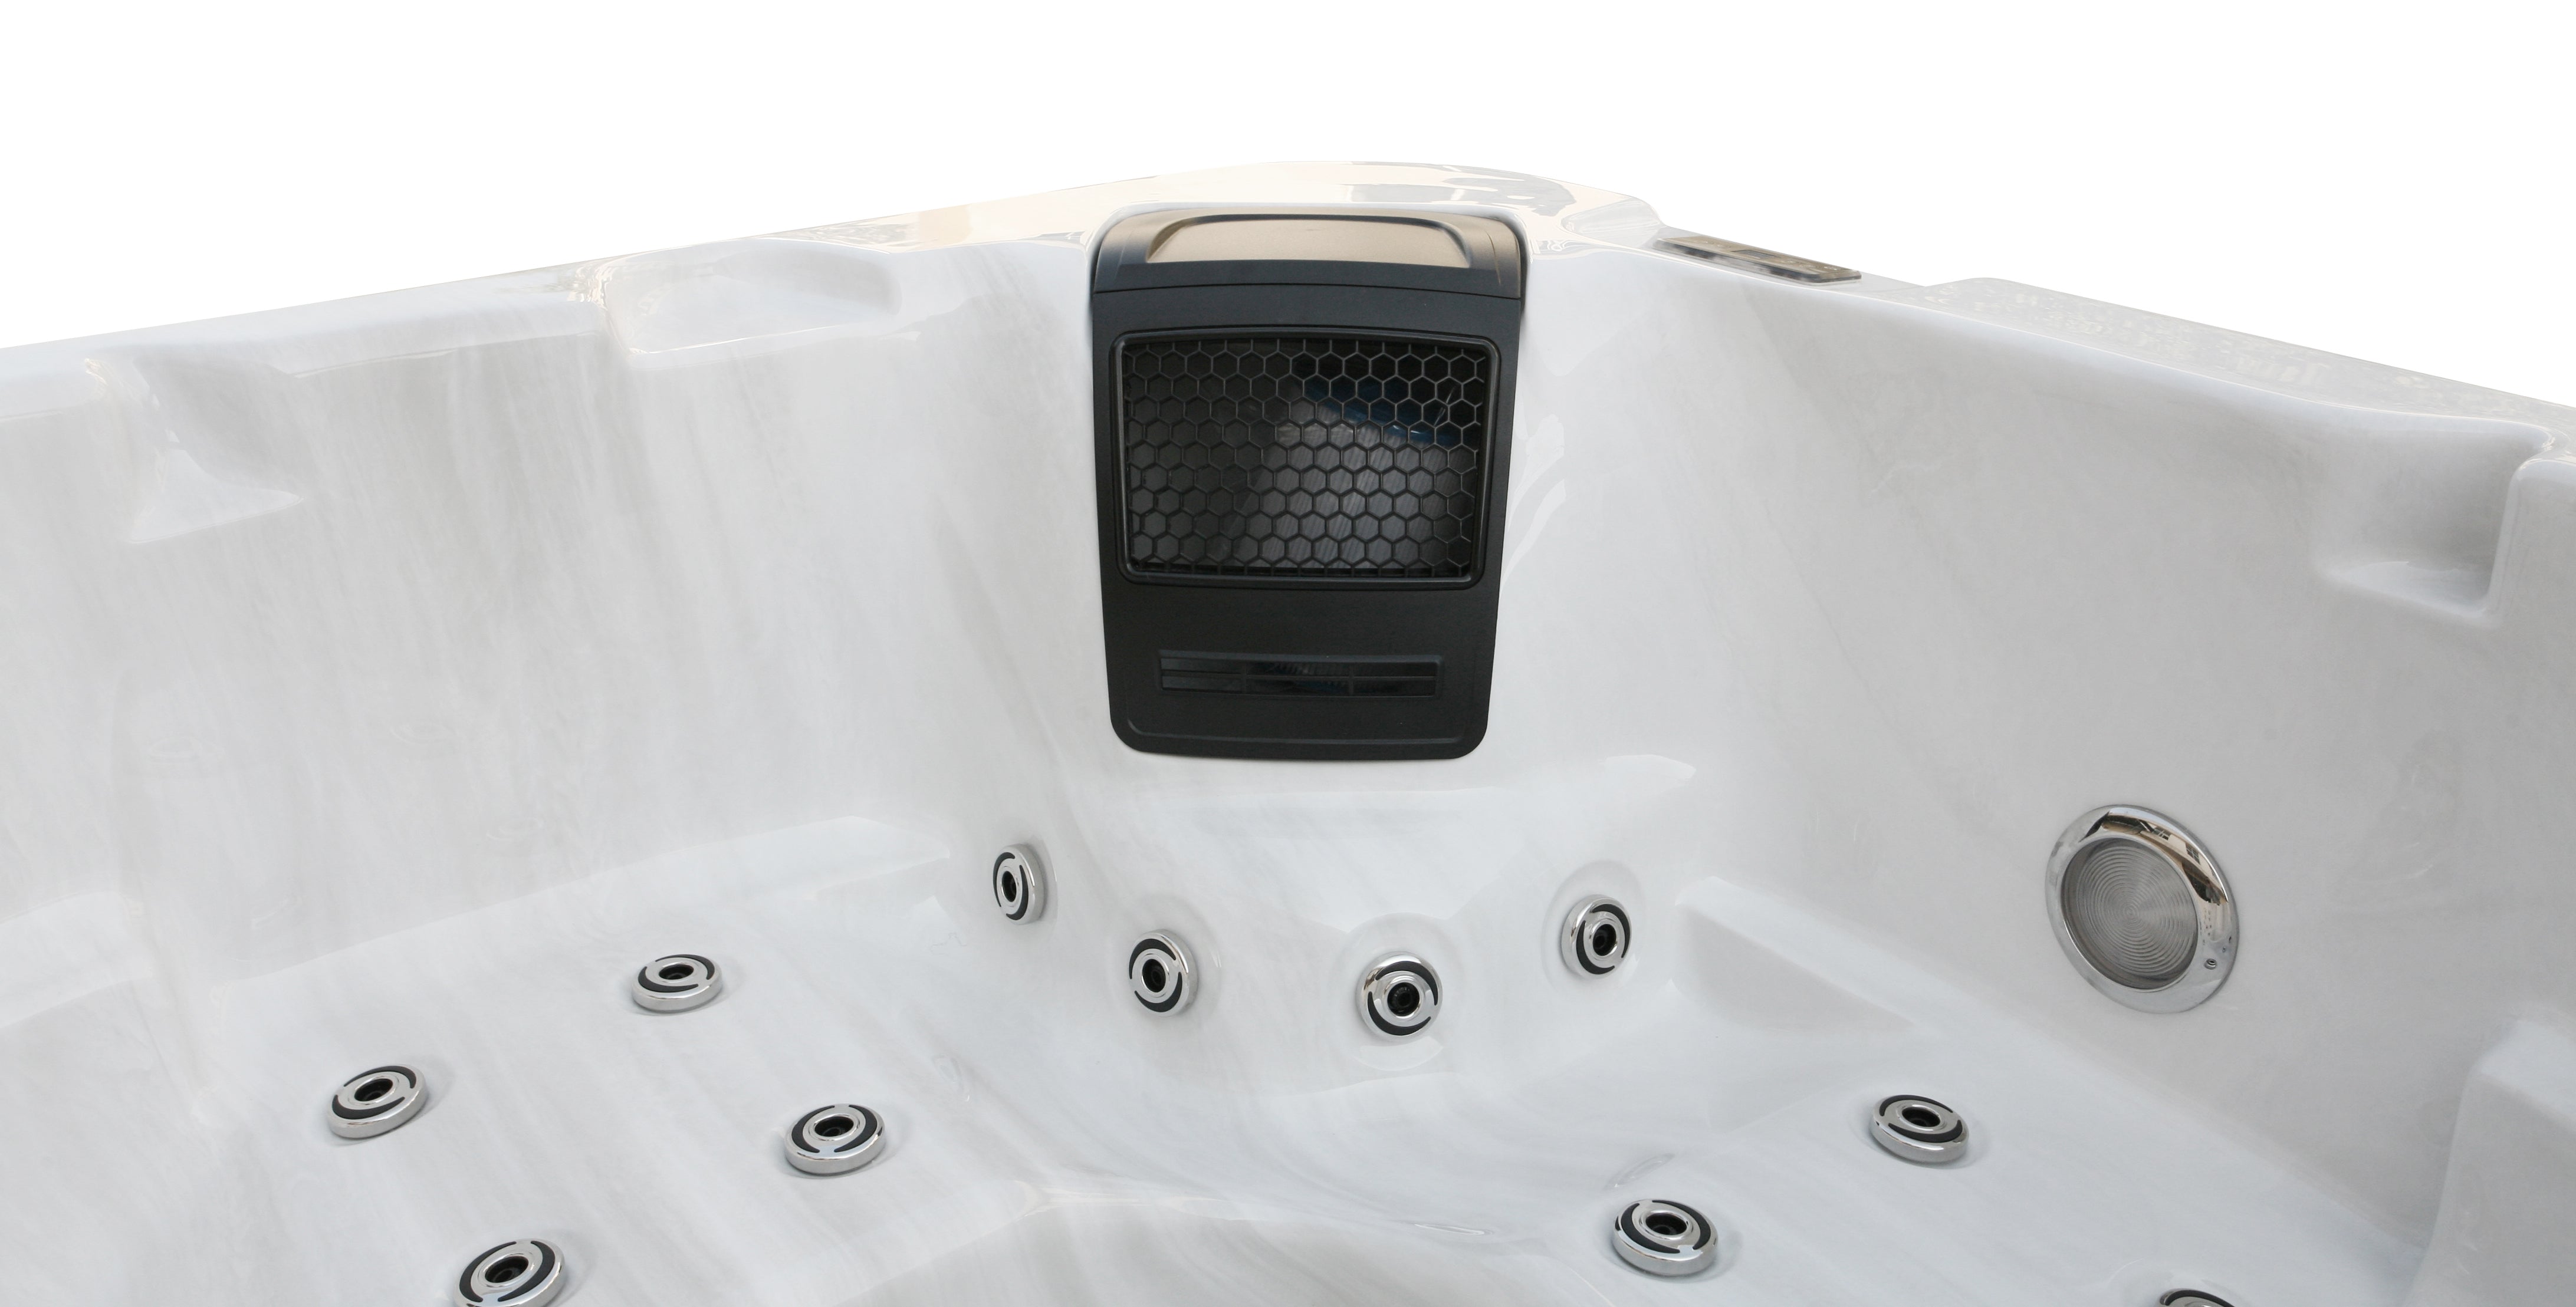 Superior Wellness Verona 5 Seater Sterling Silver Hot Tub